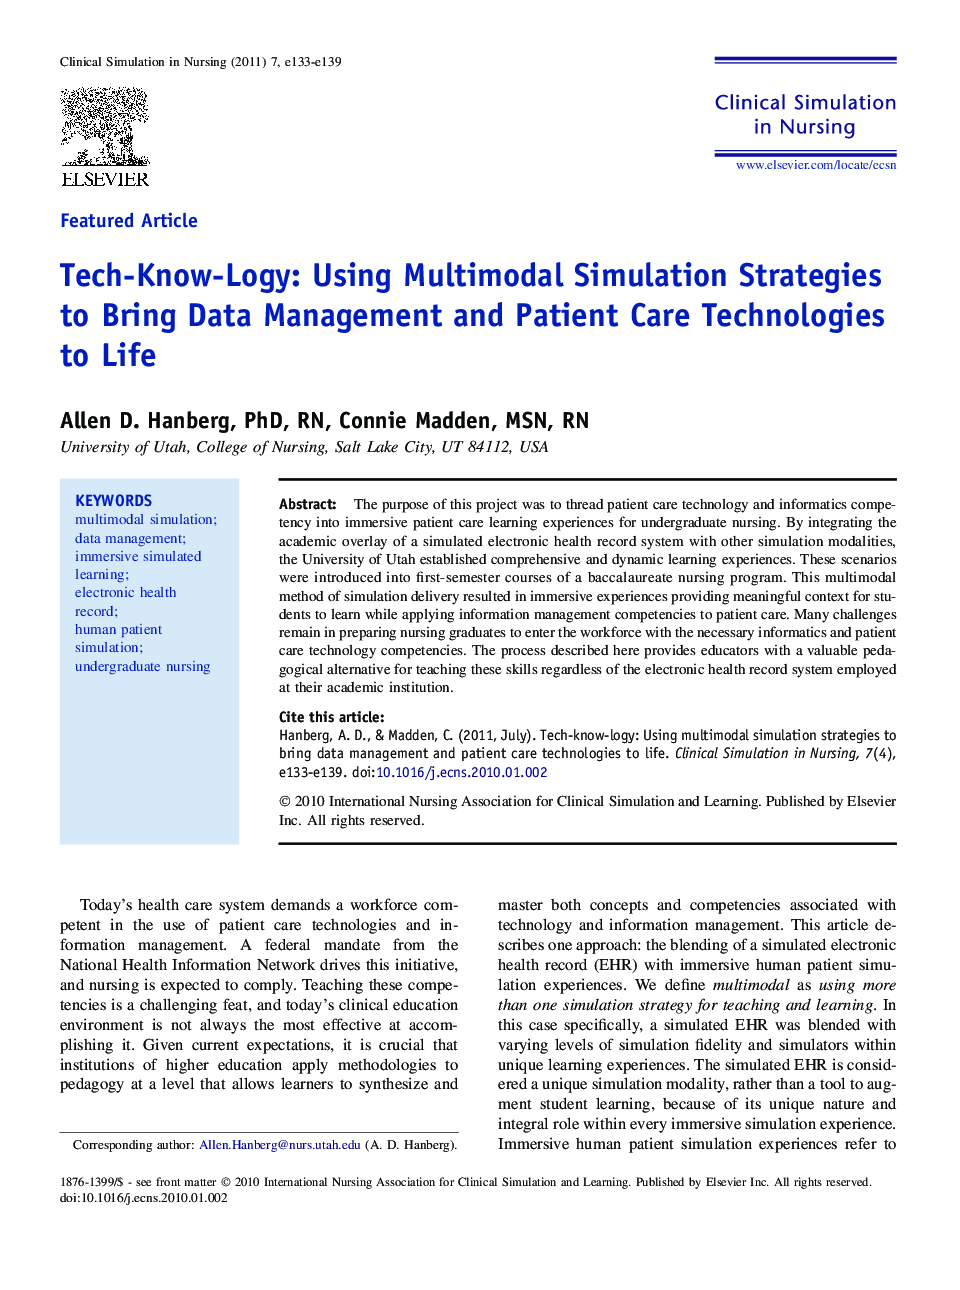 Tech-Know-Logy: Using Multimodal Simulation Strategies to Bring Data Management and Patient Care Technologies to Life